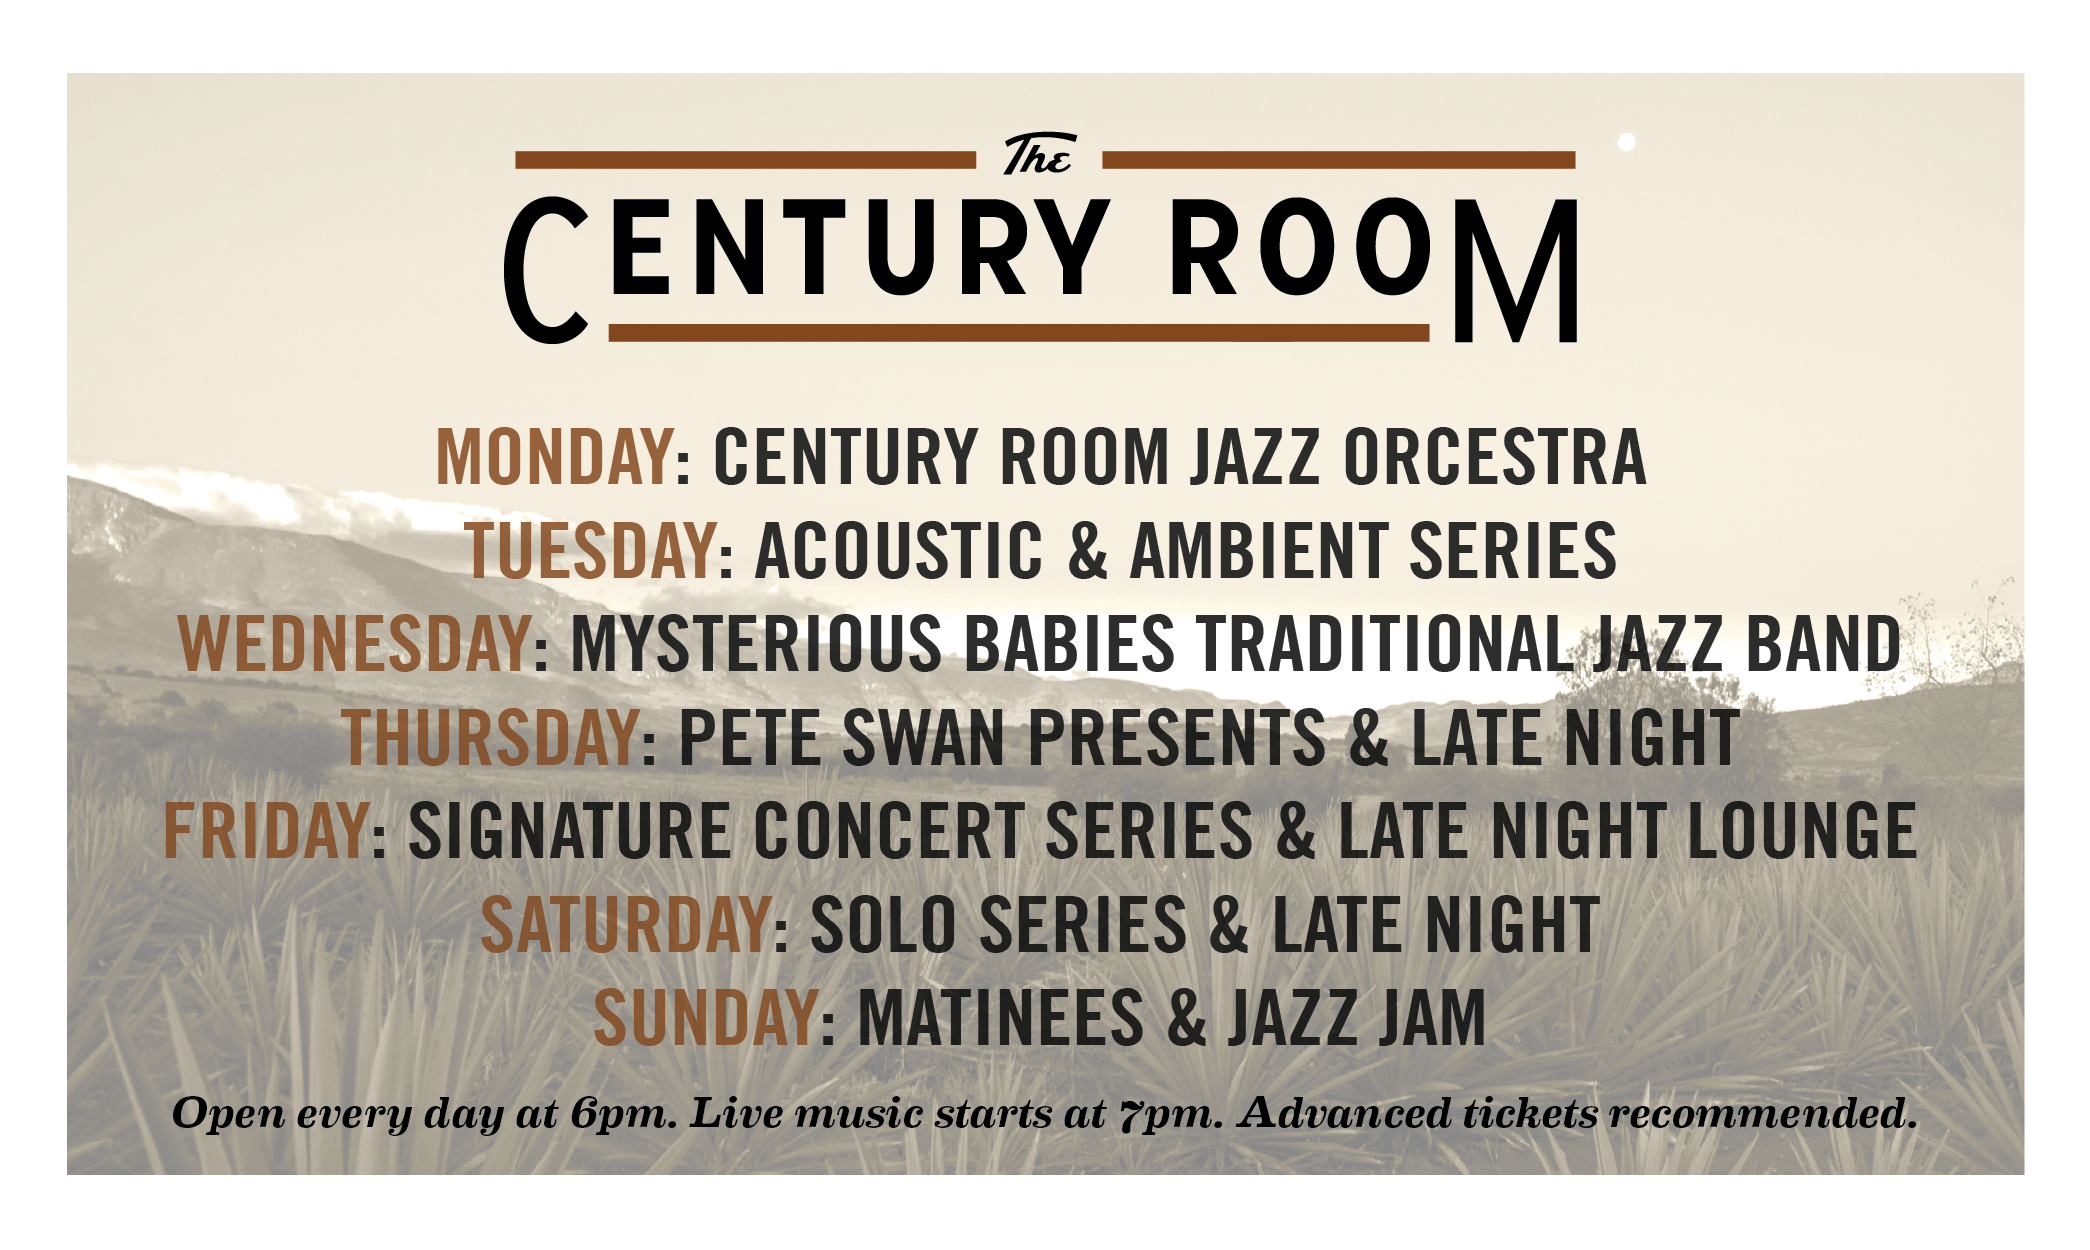 Monday: Century Room Jazz Orchestra; Tuesday Acoustic & Ambient Series; Wednesday Traditional Jazz; Thursday Pete Swan Presents & Late Night; Friday: Signature Concert Series; Saturday Solo Series & Late Night; Sundays: Matinees & Jazz Jam